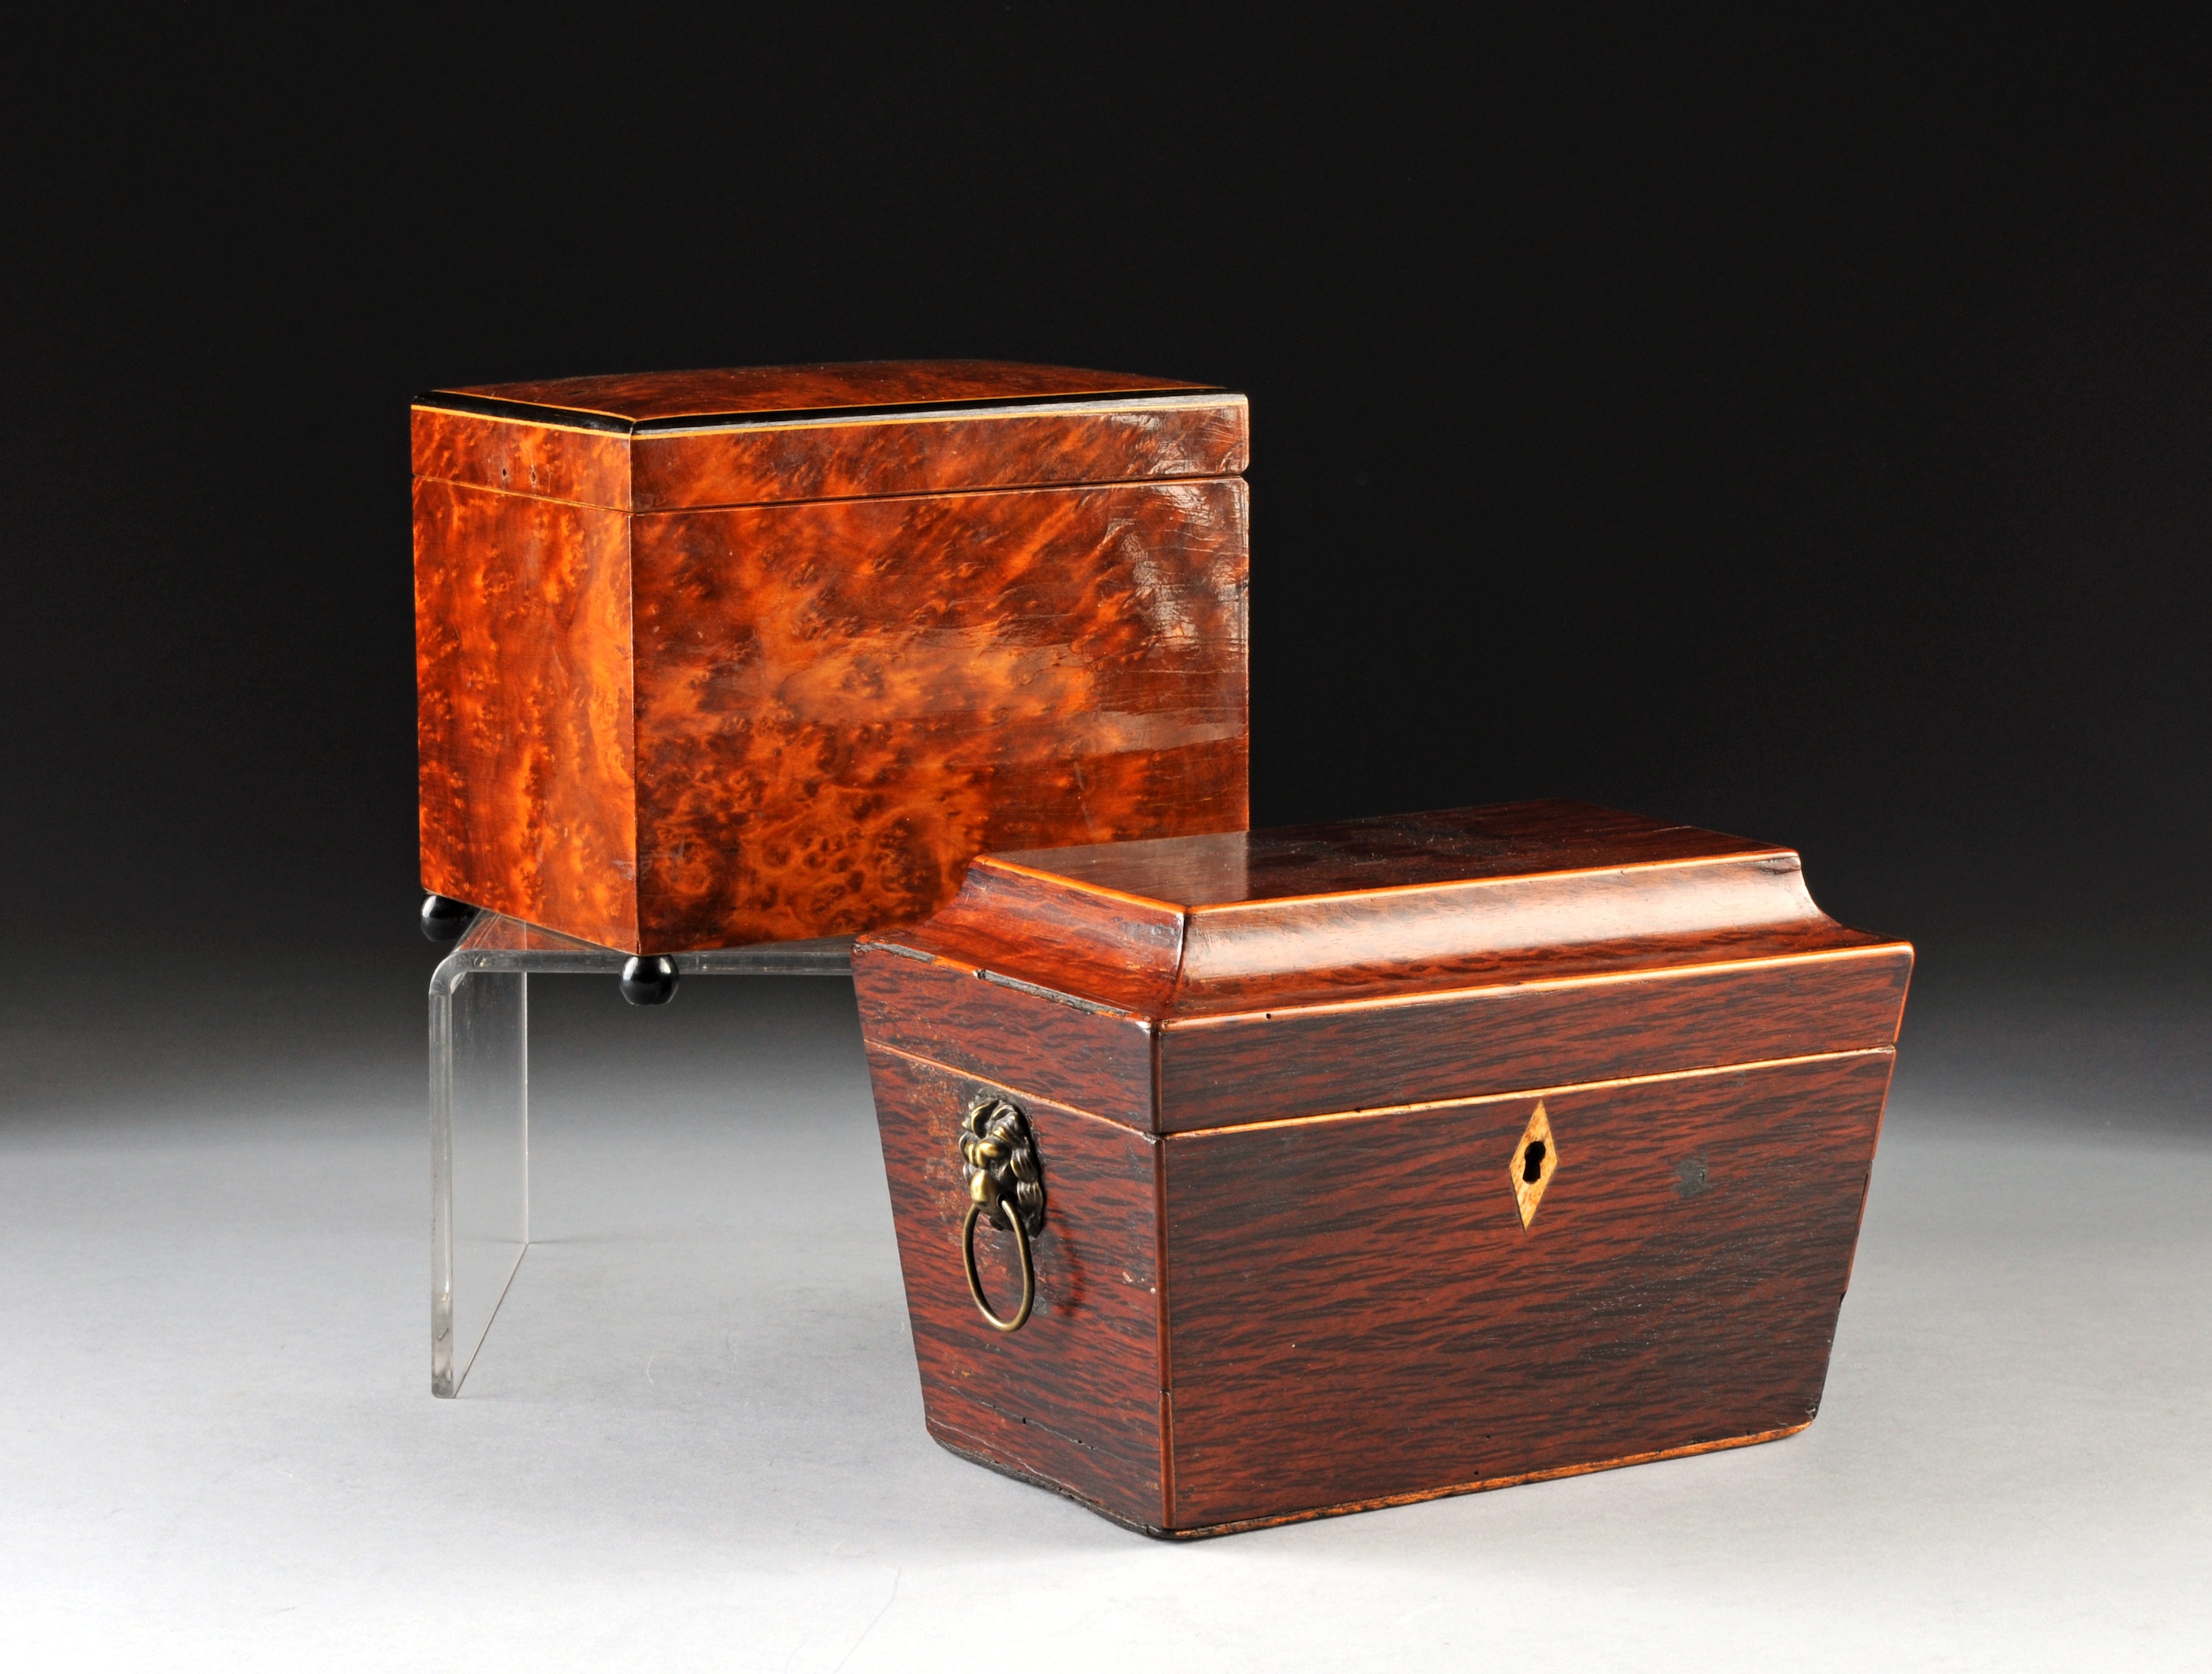 A REGENCY ROSEWOOD TEA CADDY AND AN AUSTRIAN BURL WOOD MUSICAL CIGARETTE BOX, 19TH AND 20TH